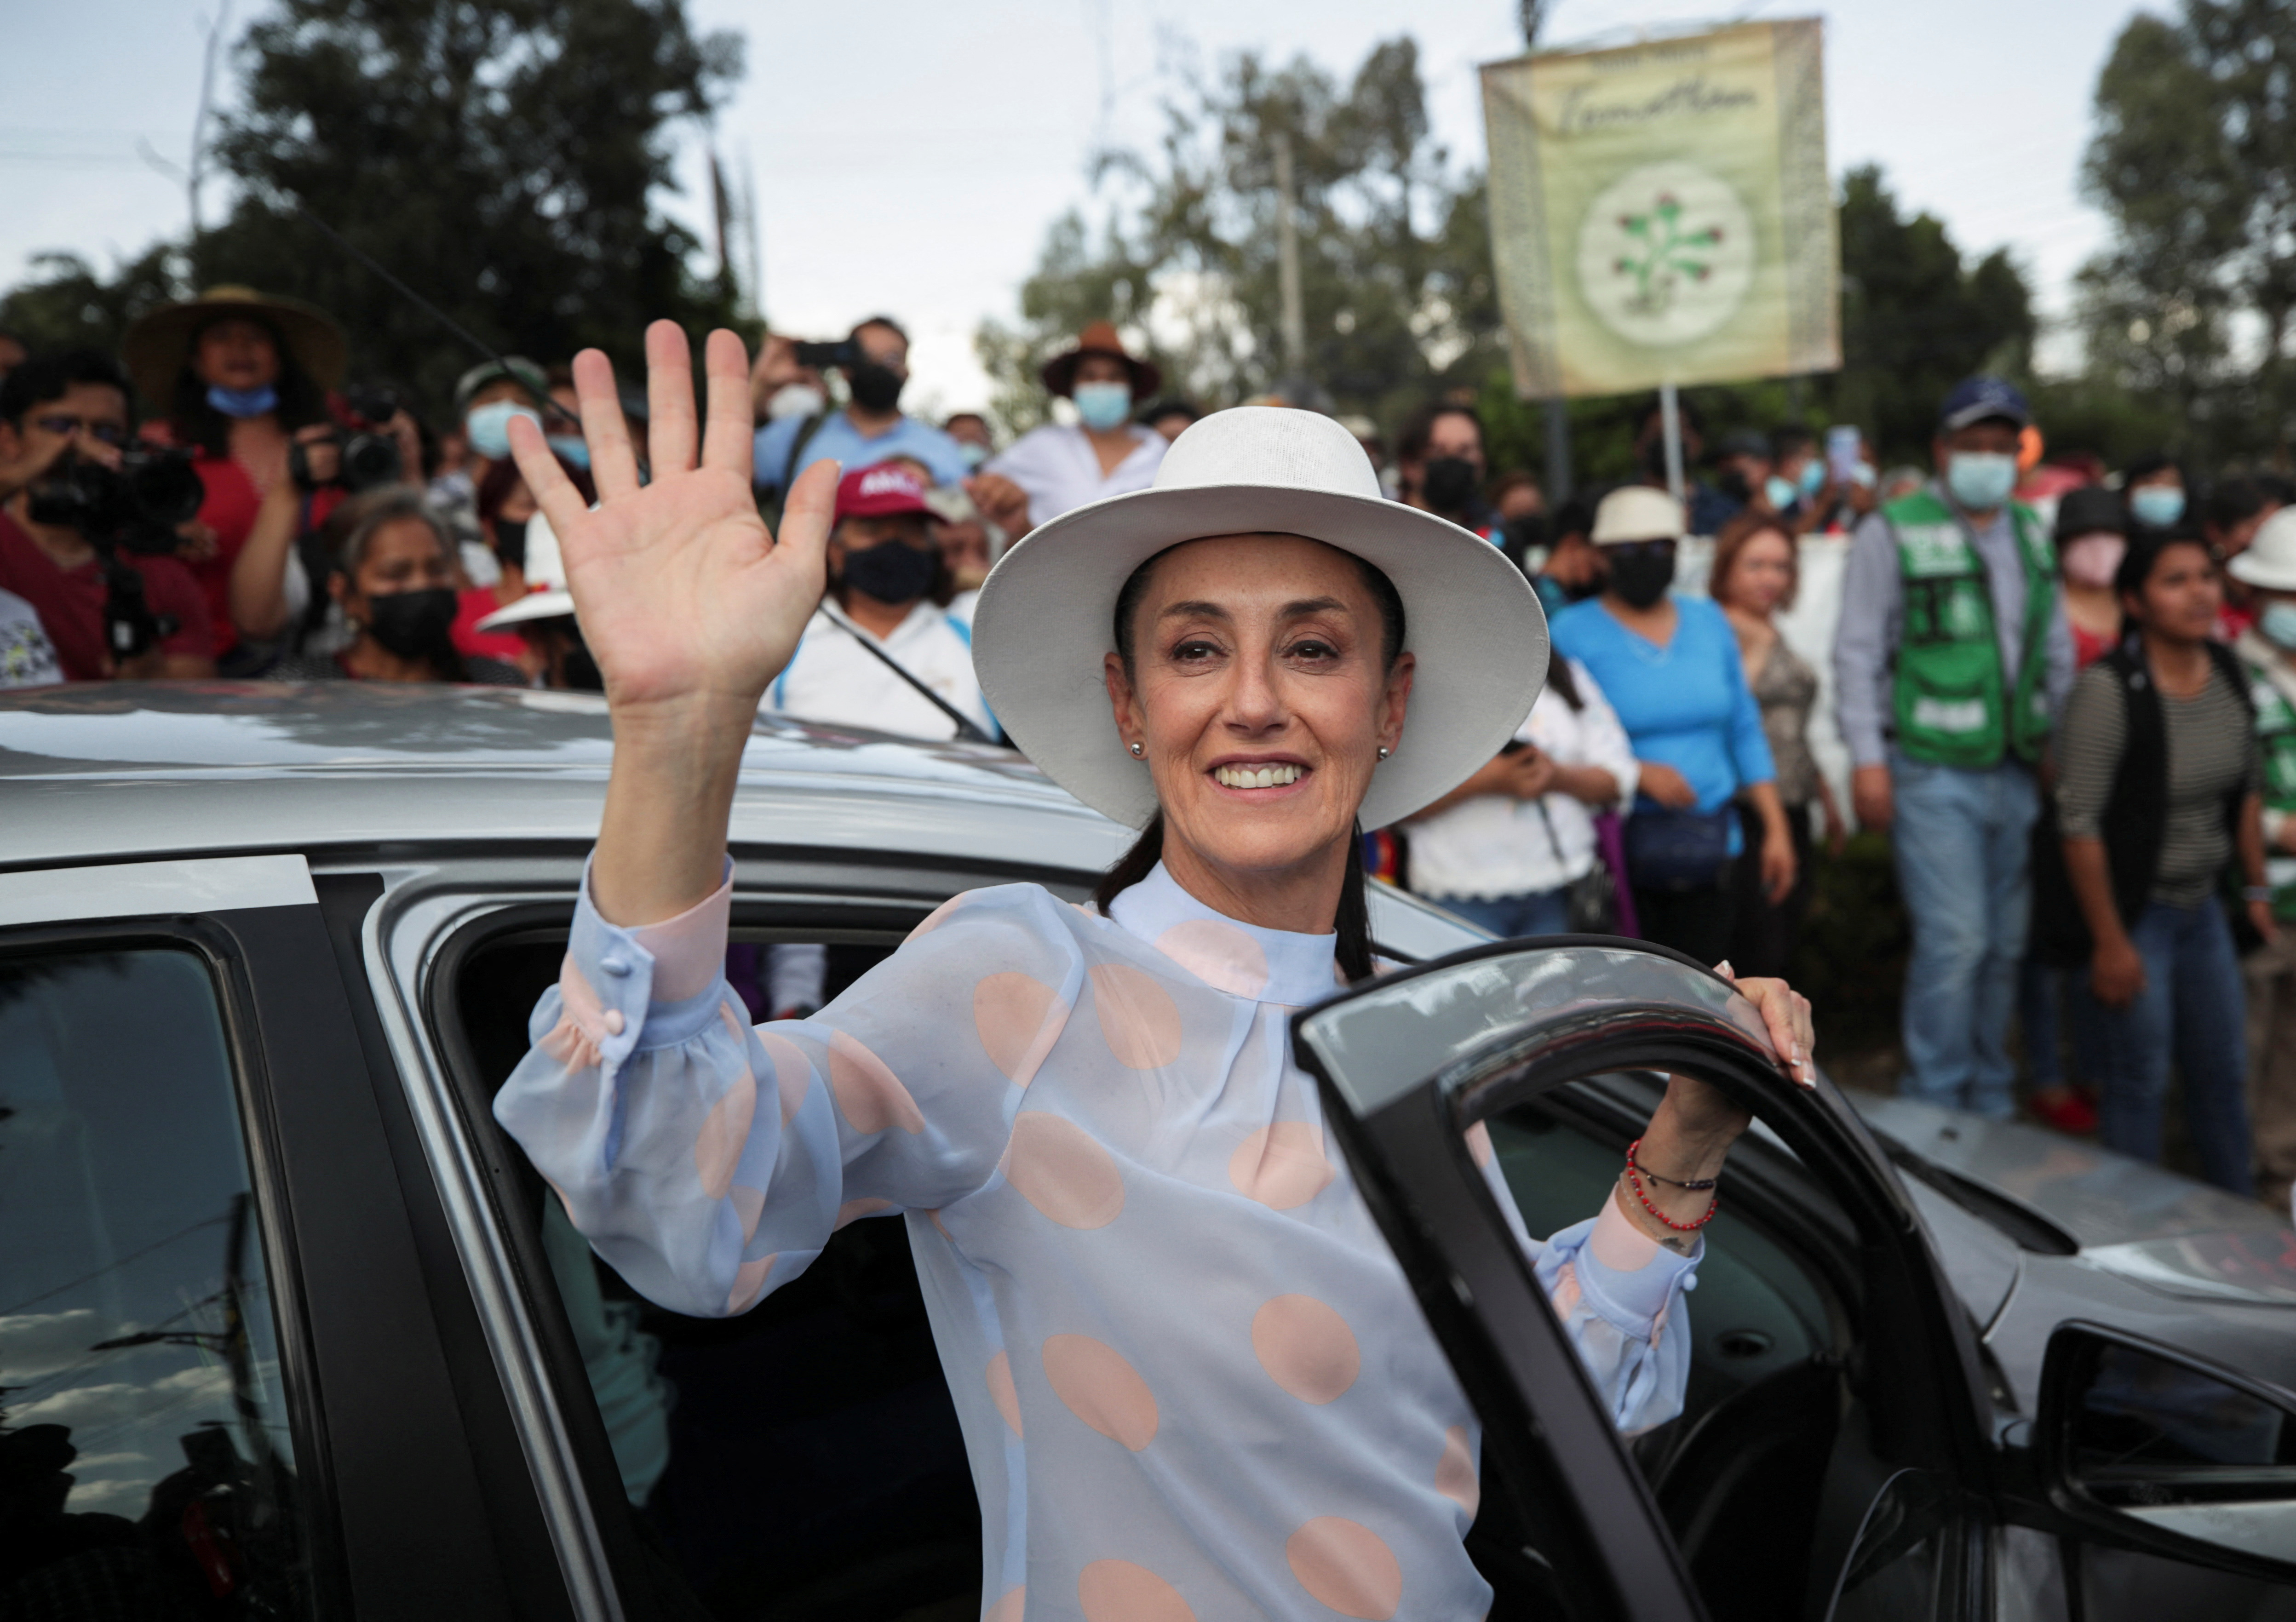 Mexican succession puts scientist on path to be first female president